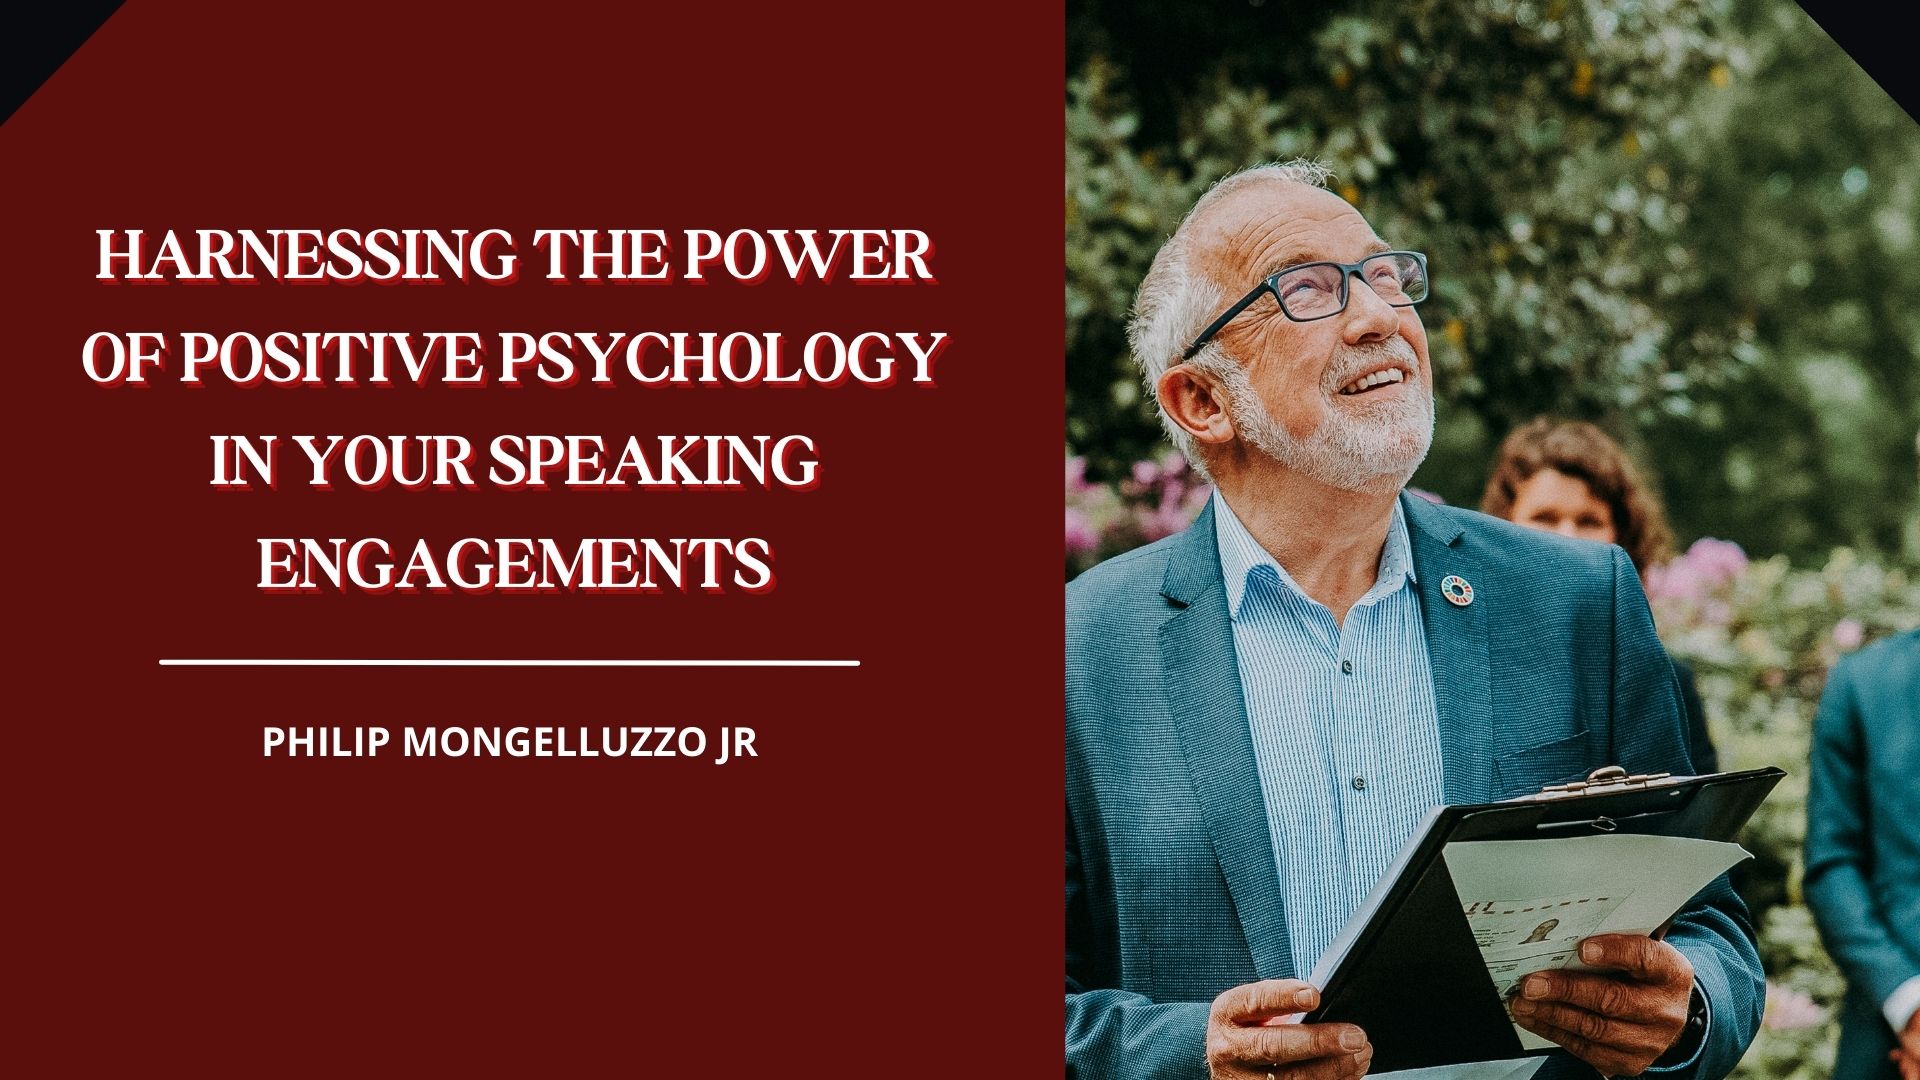 HARNESSING THE POWER
OF POSITIVE PSYCHOLOGY
IN YOUR SPEAKING
ENGAGEMENTS

PHILIP MONGELLUZZO JR